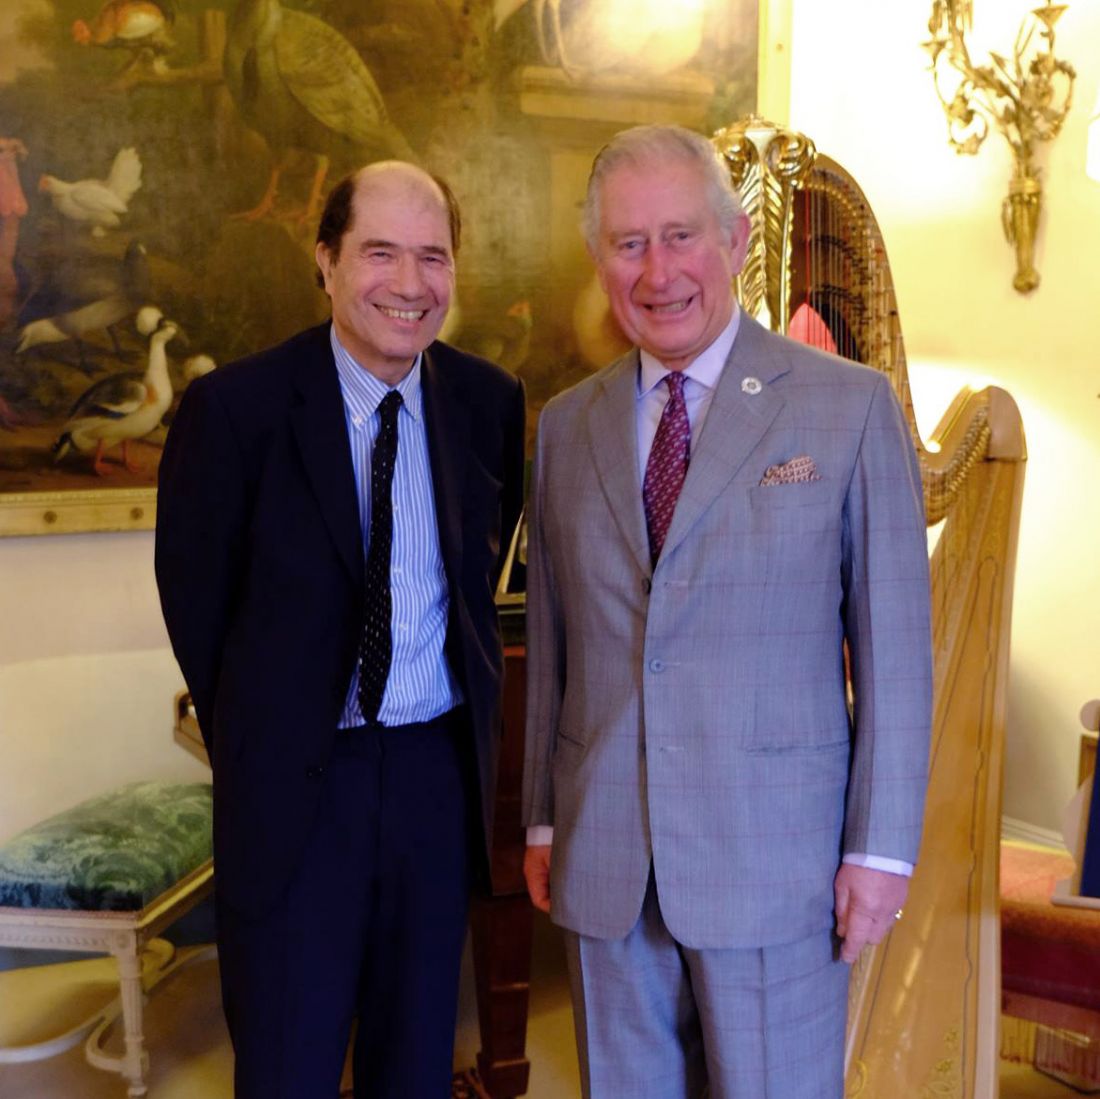 Michael Berkeley (left) with His Royal Highness the Prince of Wales